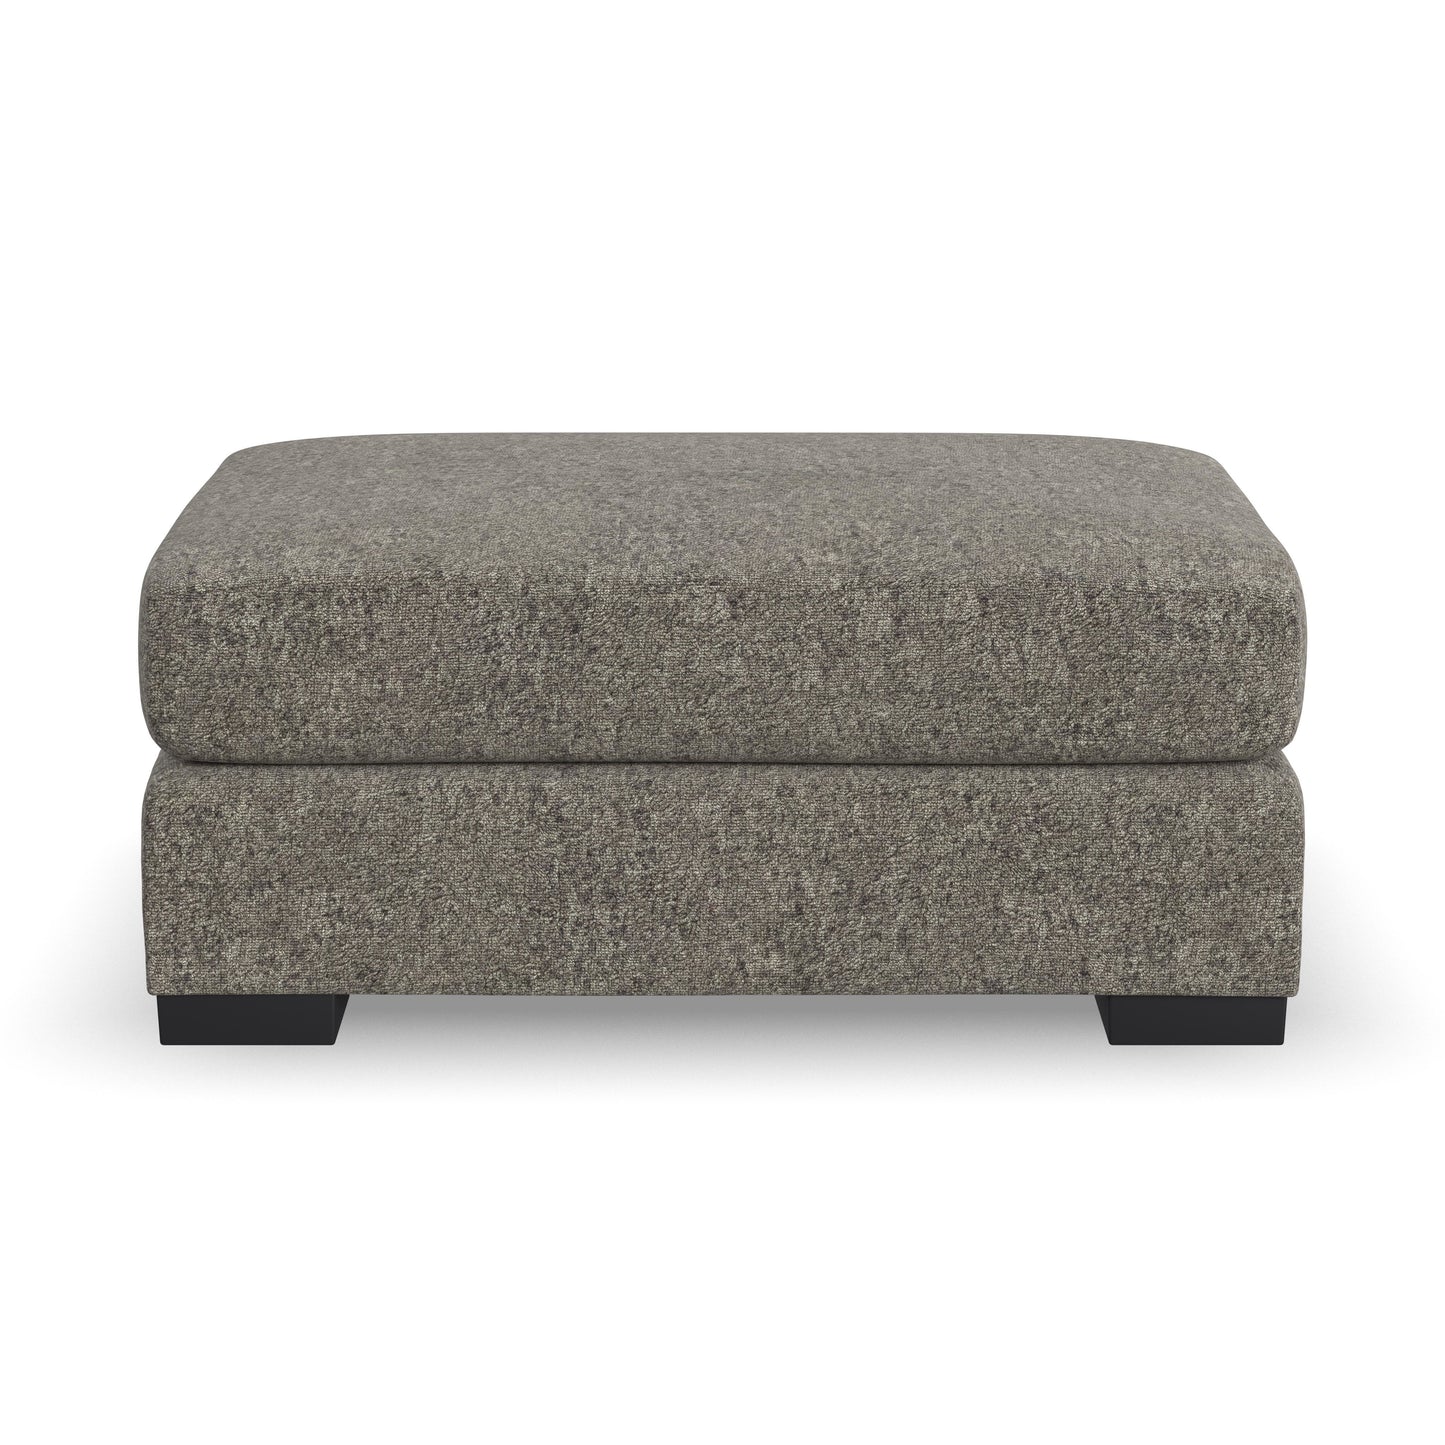 Ottoman in Taupe